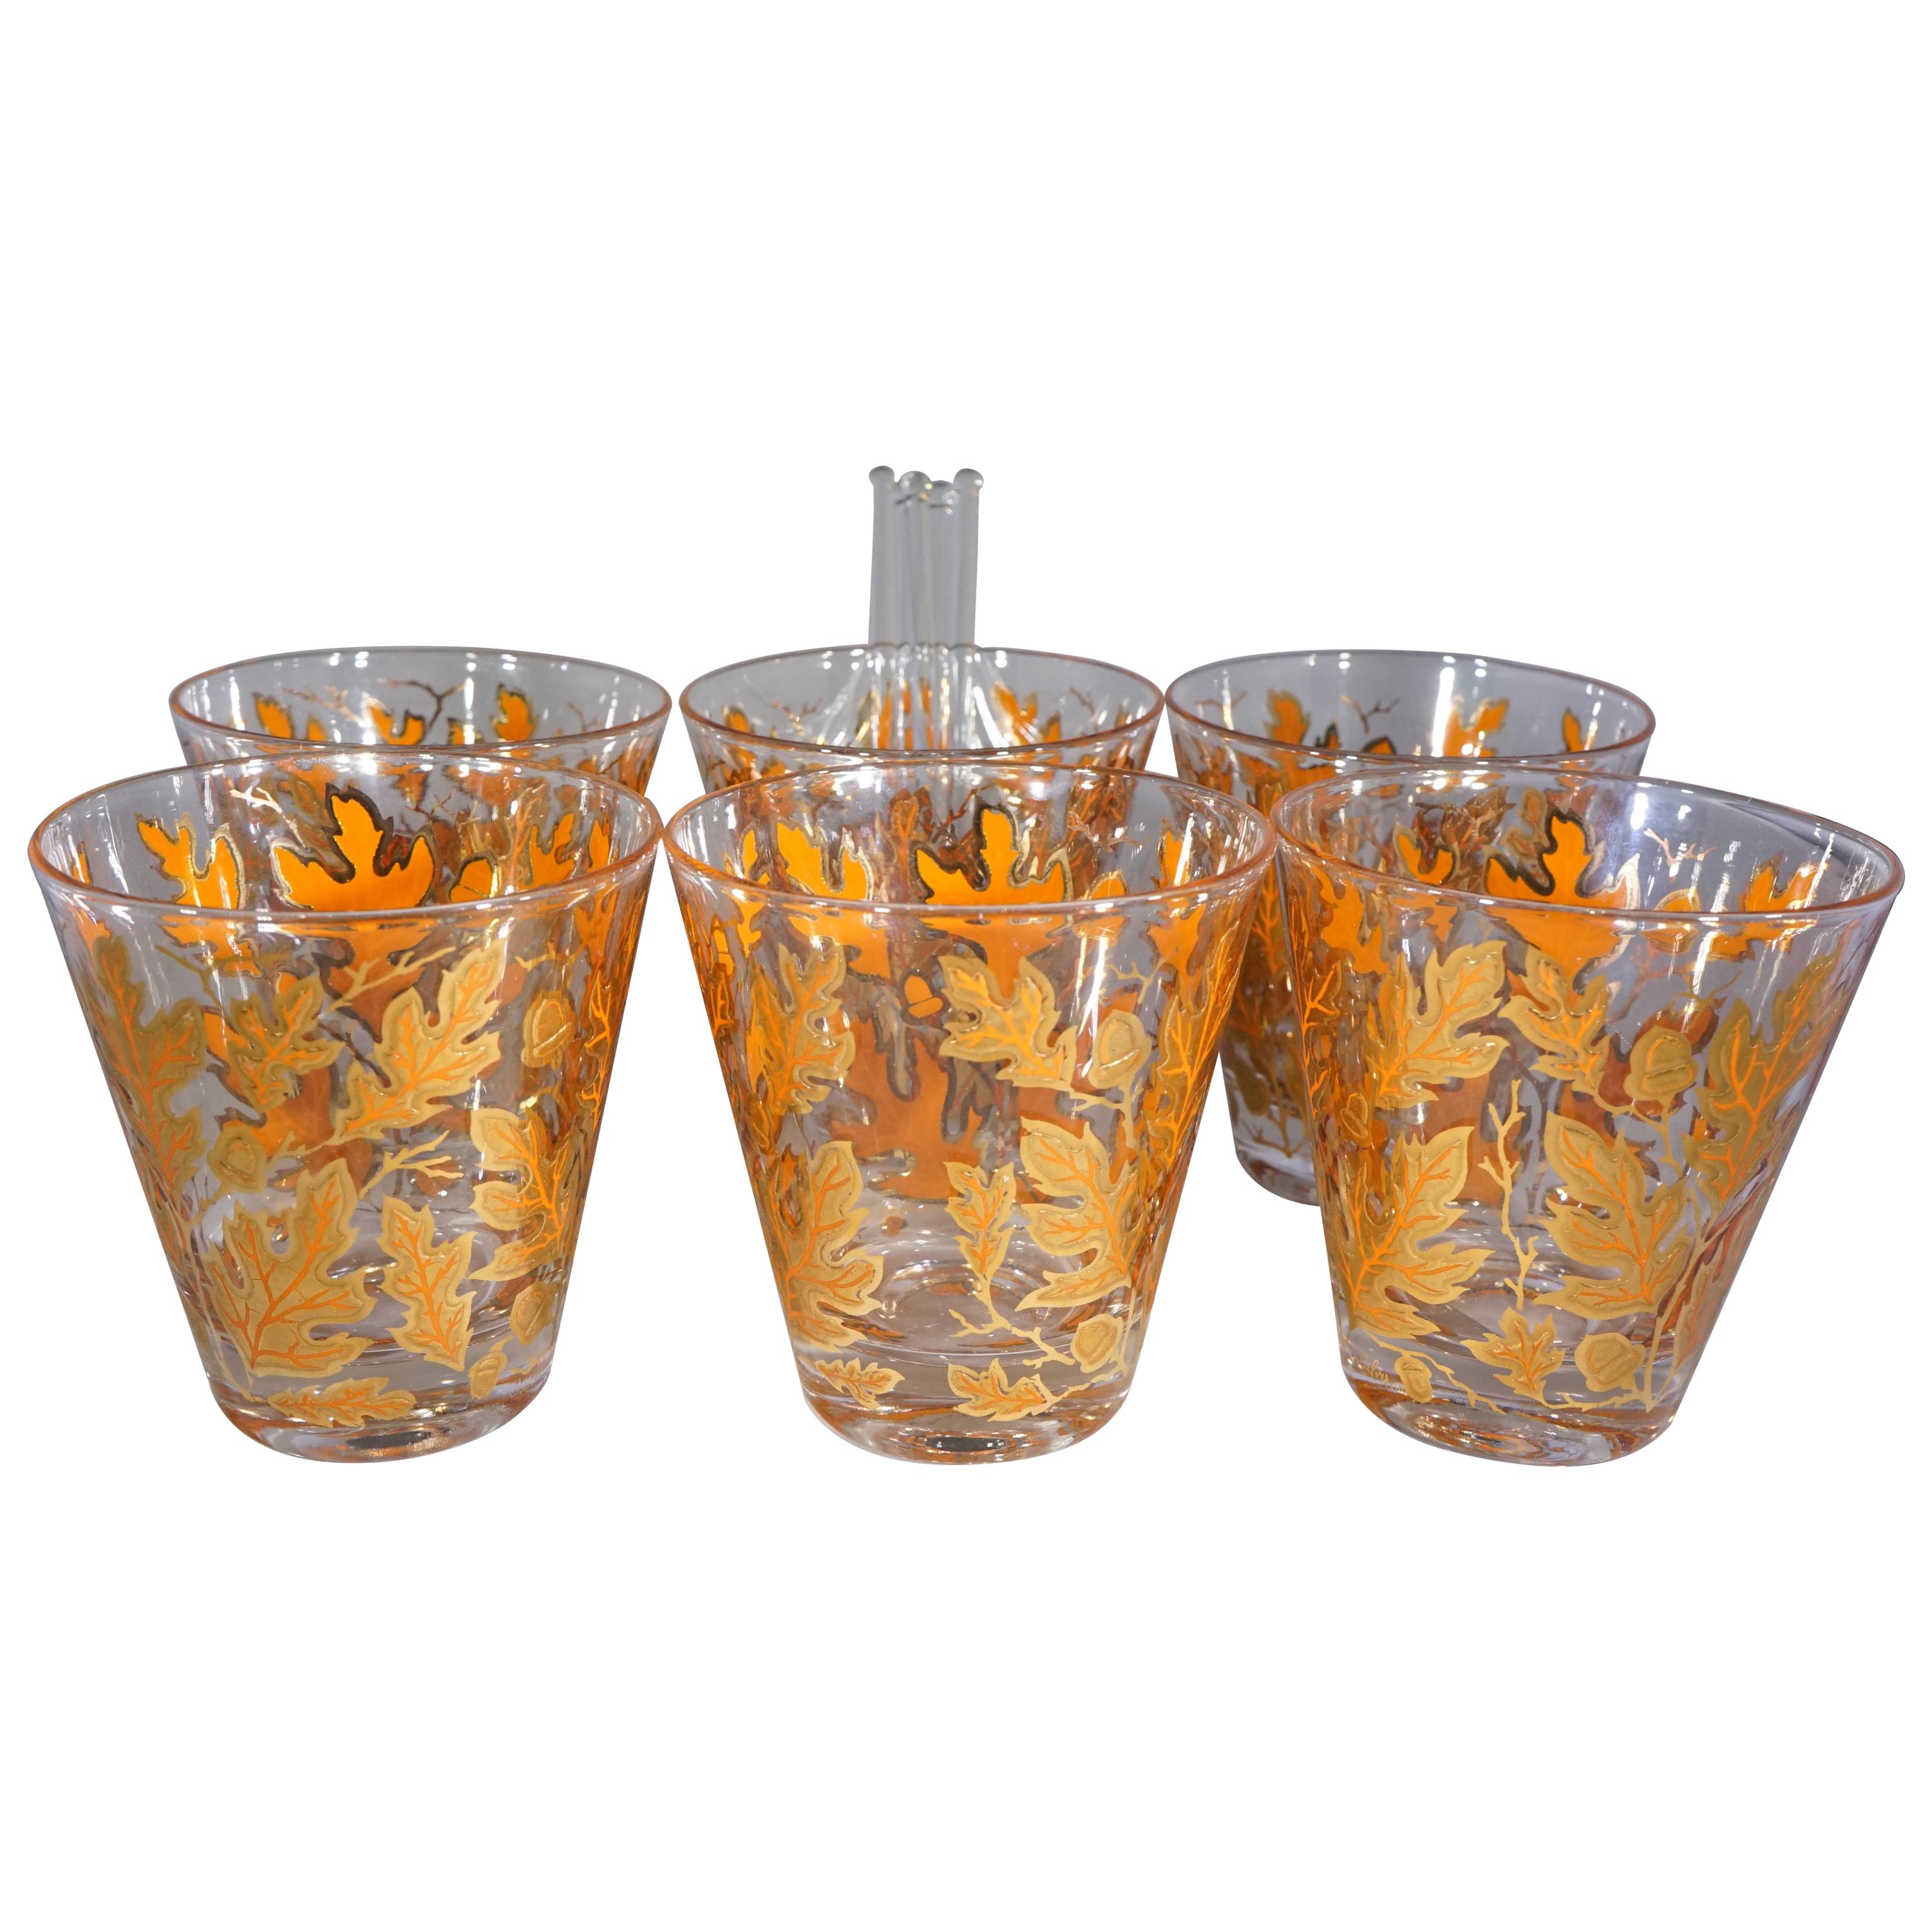 Midcentury American 6-Piece Autumn Leaves Glassware Set by Culver